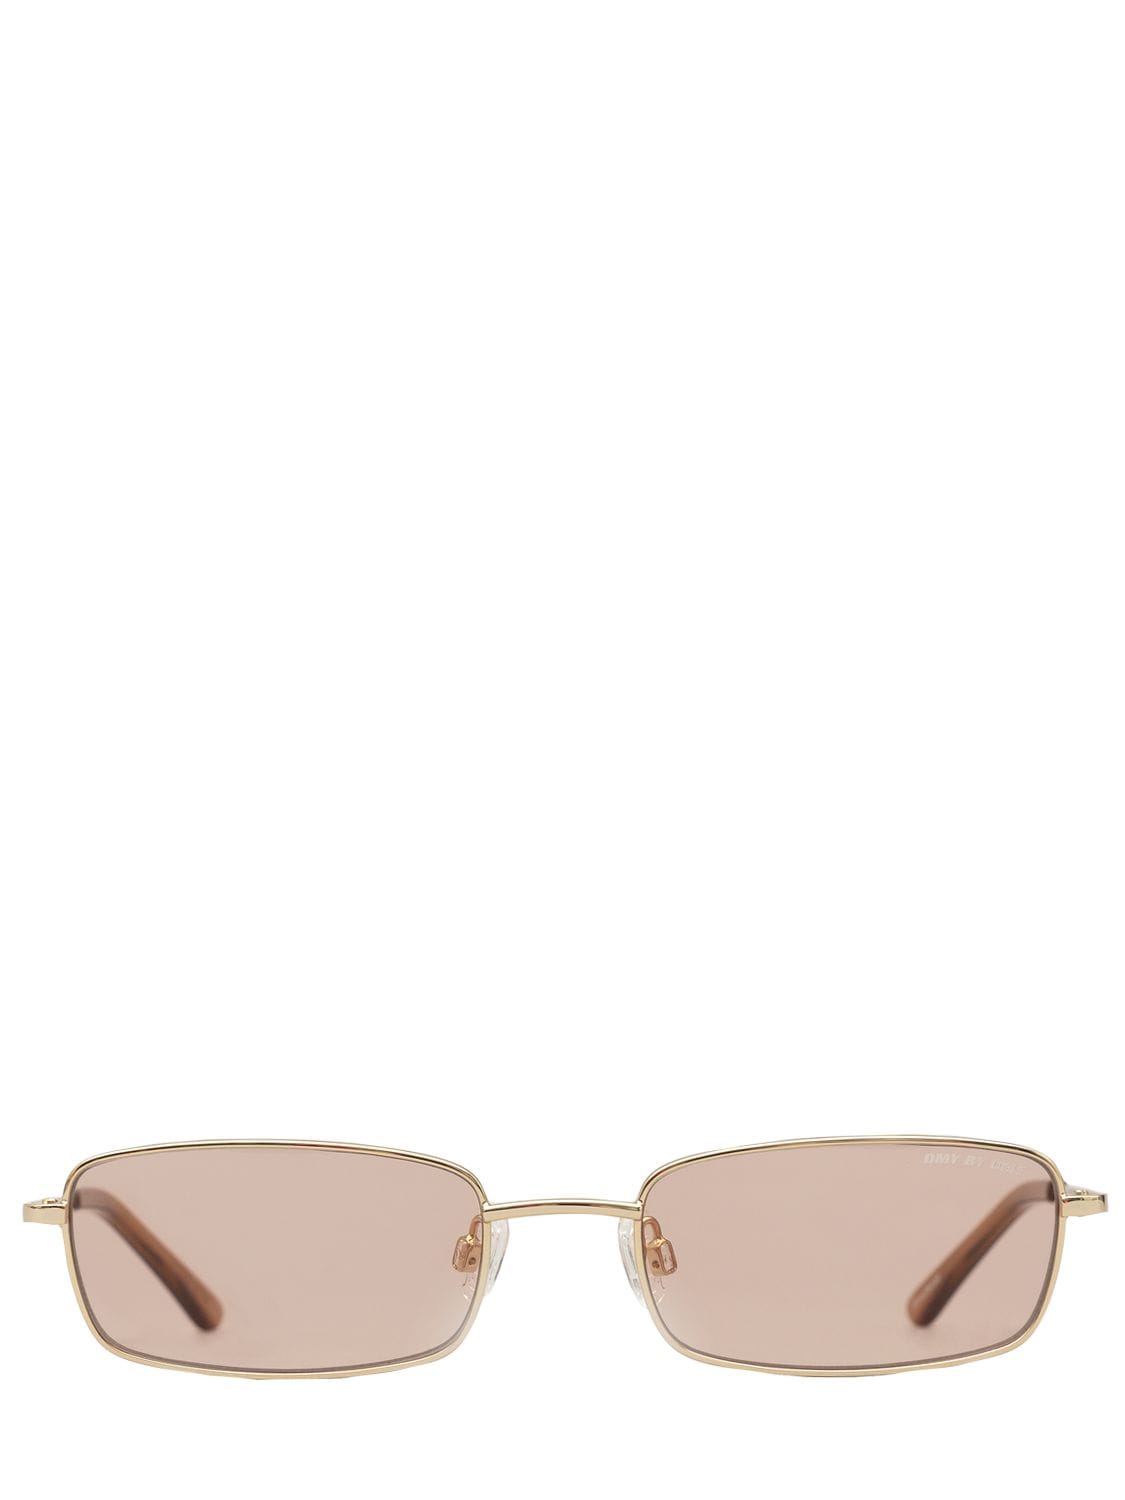 Shop Dmy By Dmy Olsen Squared Stainless Steel Sunglasses In Gold,pink